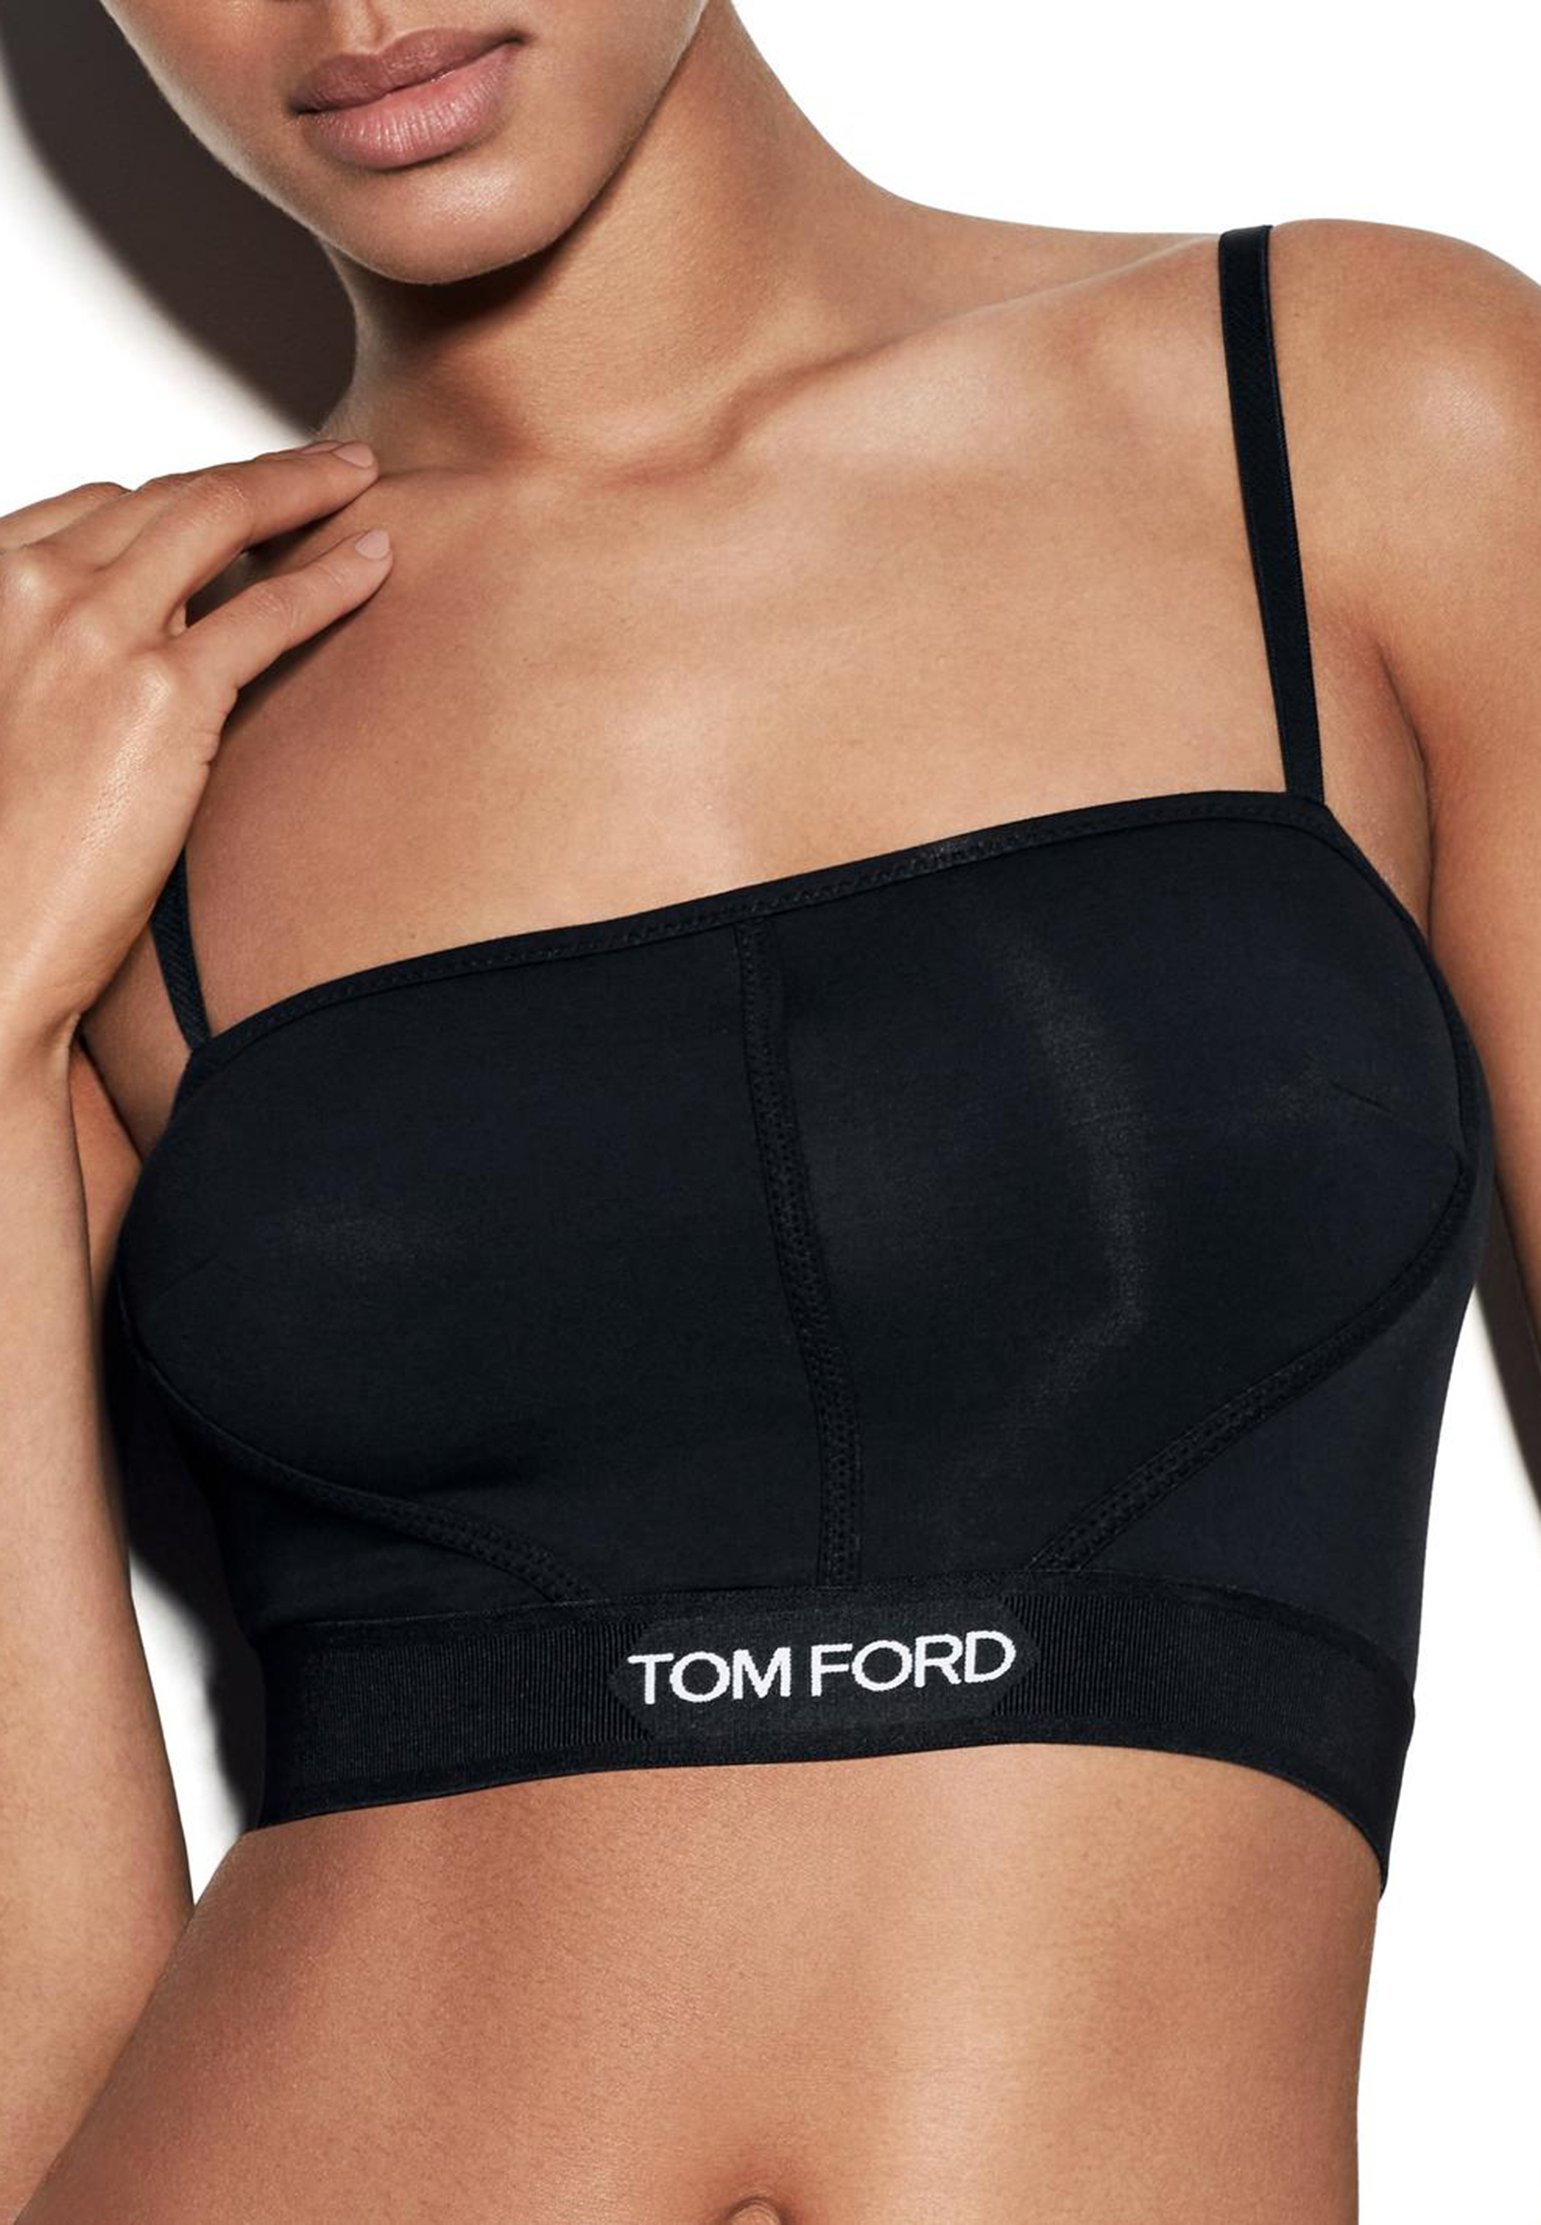 Top TOM FORD Color: black (Code: 3697) in online store Allure